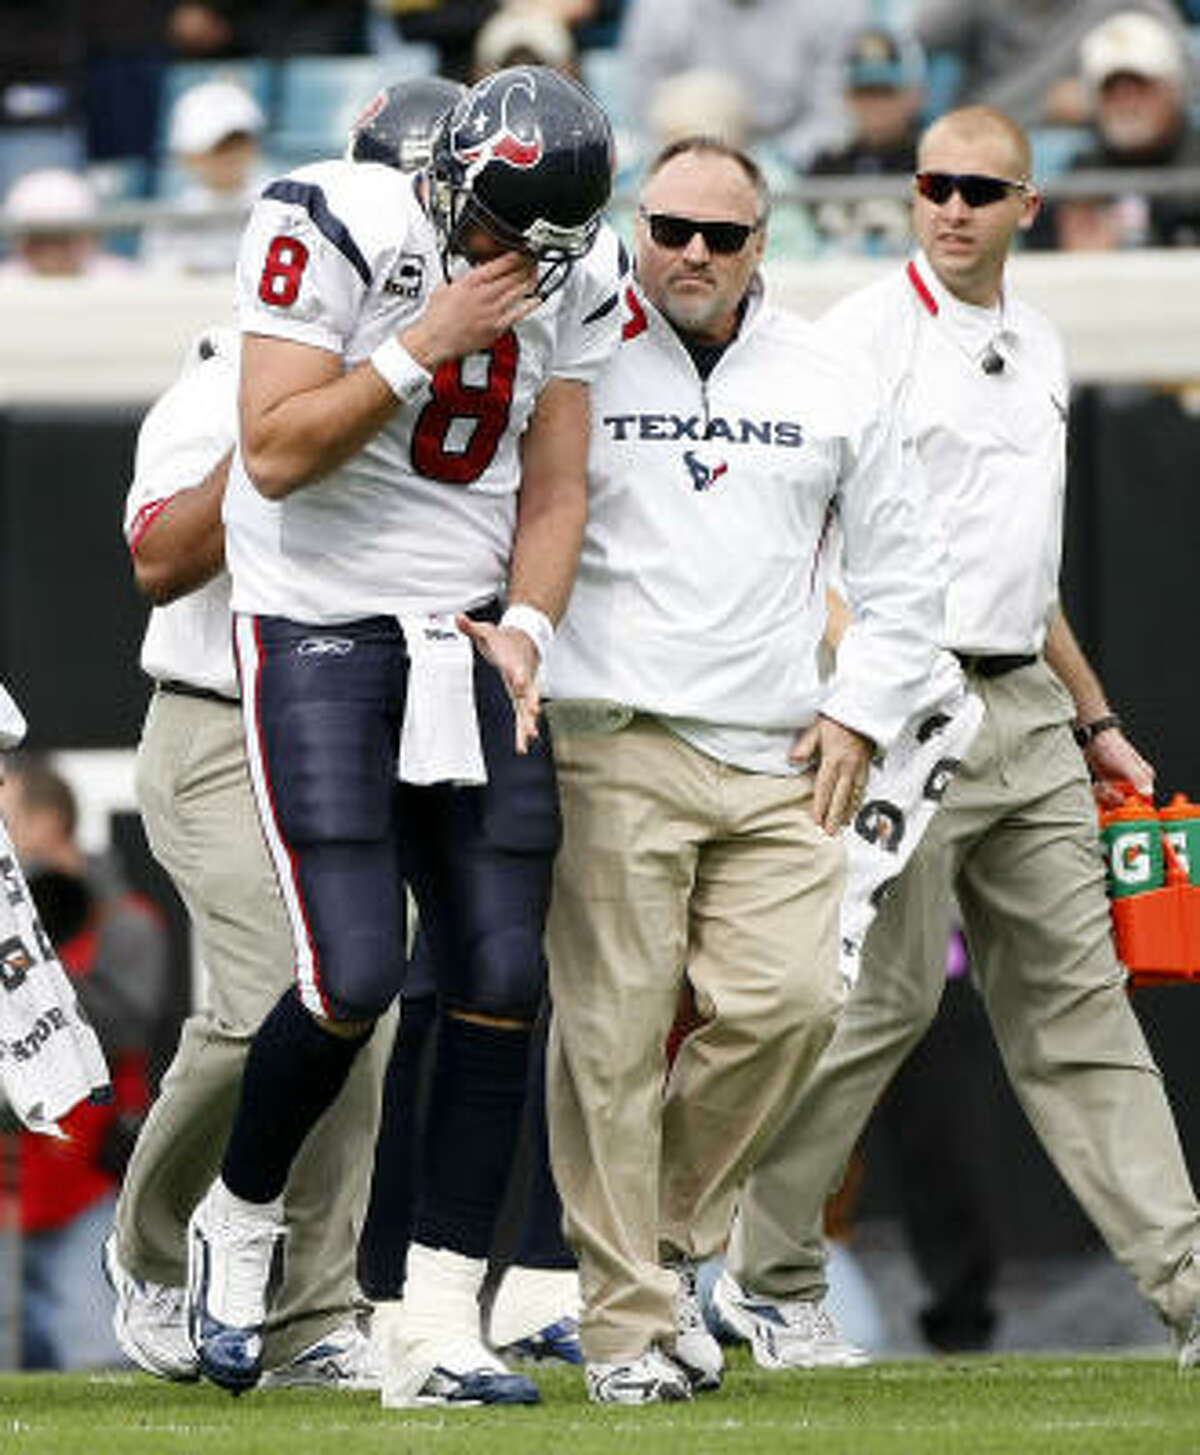 Texans quarterback Matt Schaub leaves the field after dislocating his left shoulder on the Texans' first offensive play. Schaub returned to the game in the second quarter.